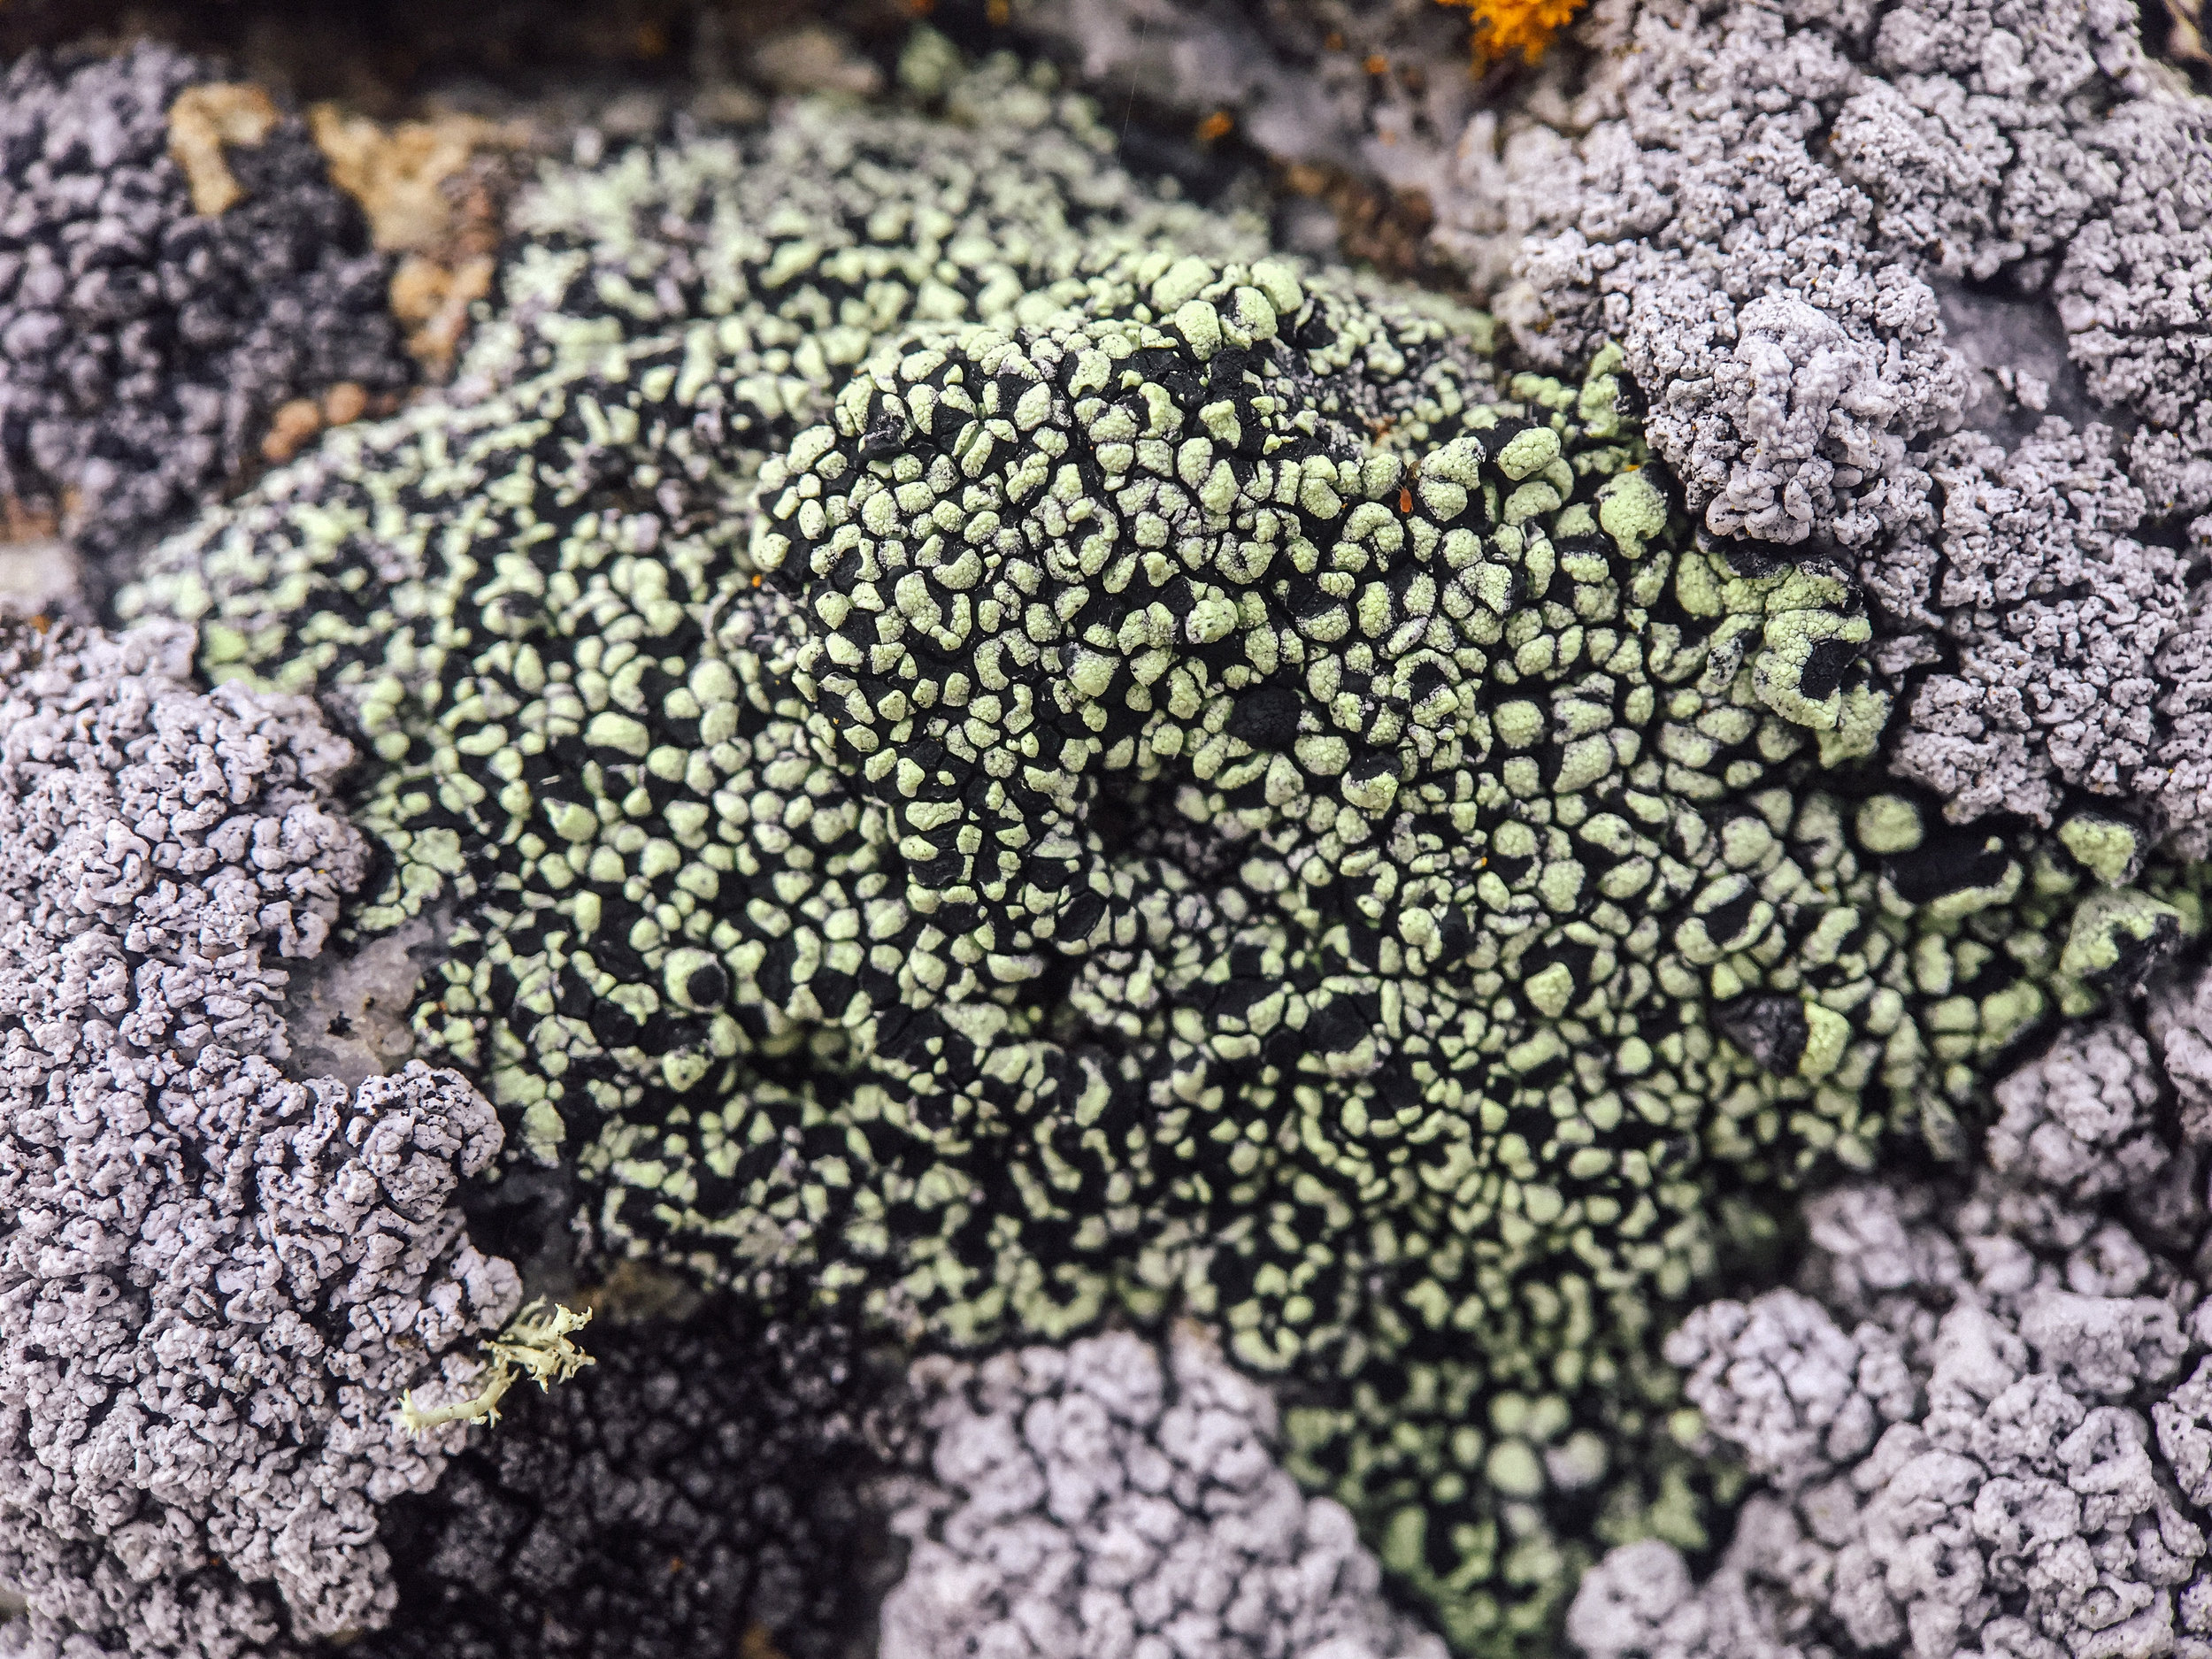 Another important lesson: recognizing and naming lichens correctly is daunting.